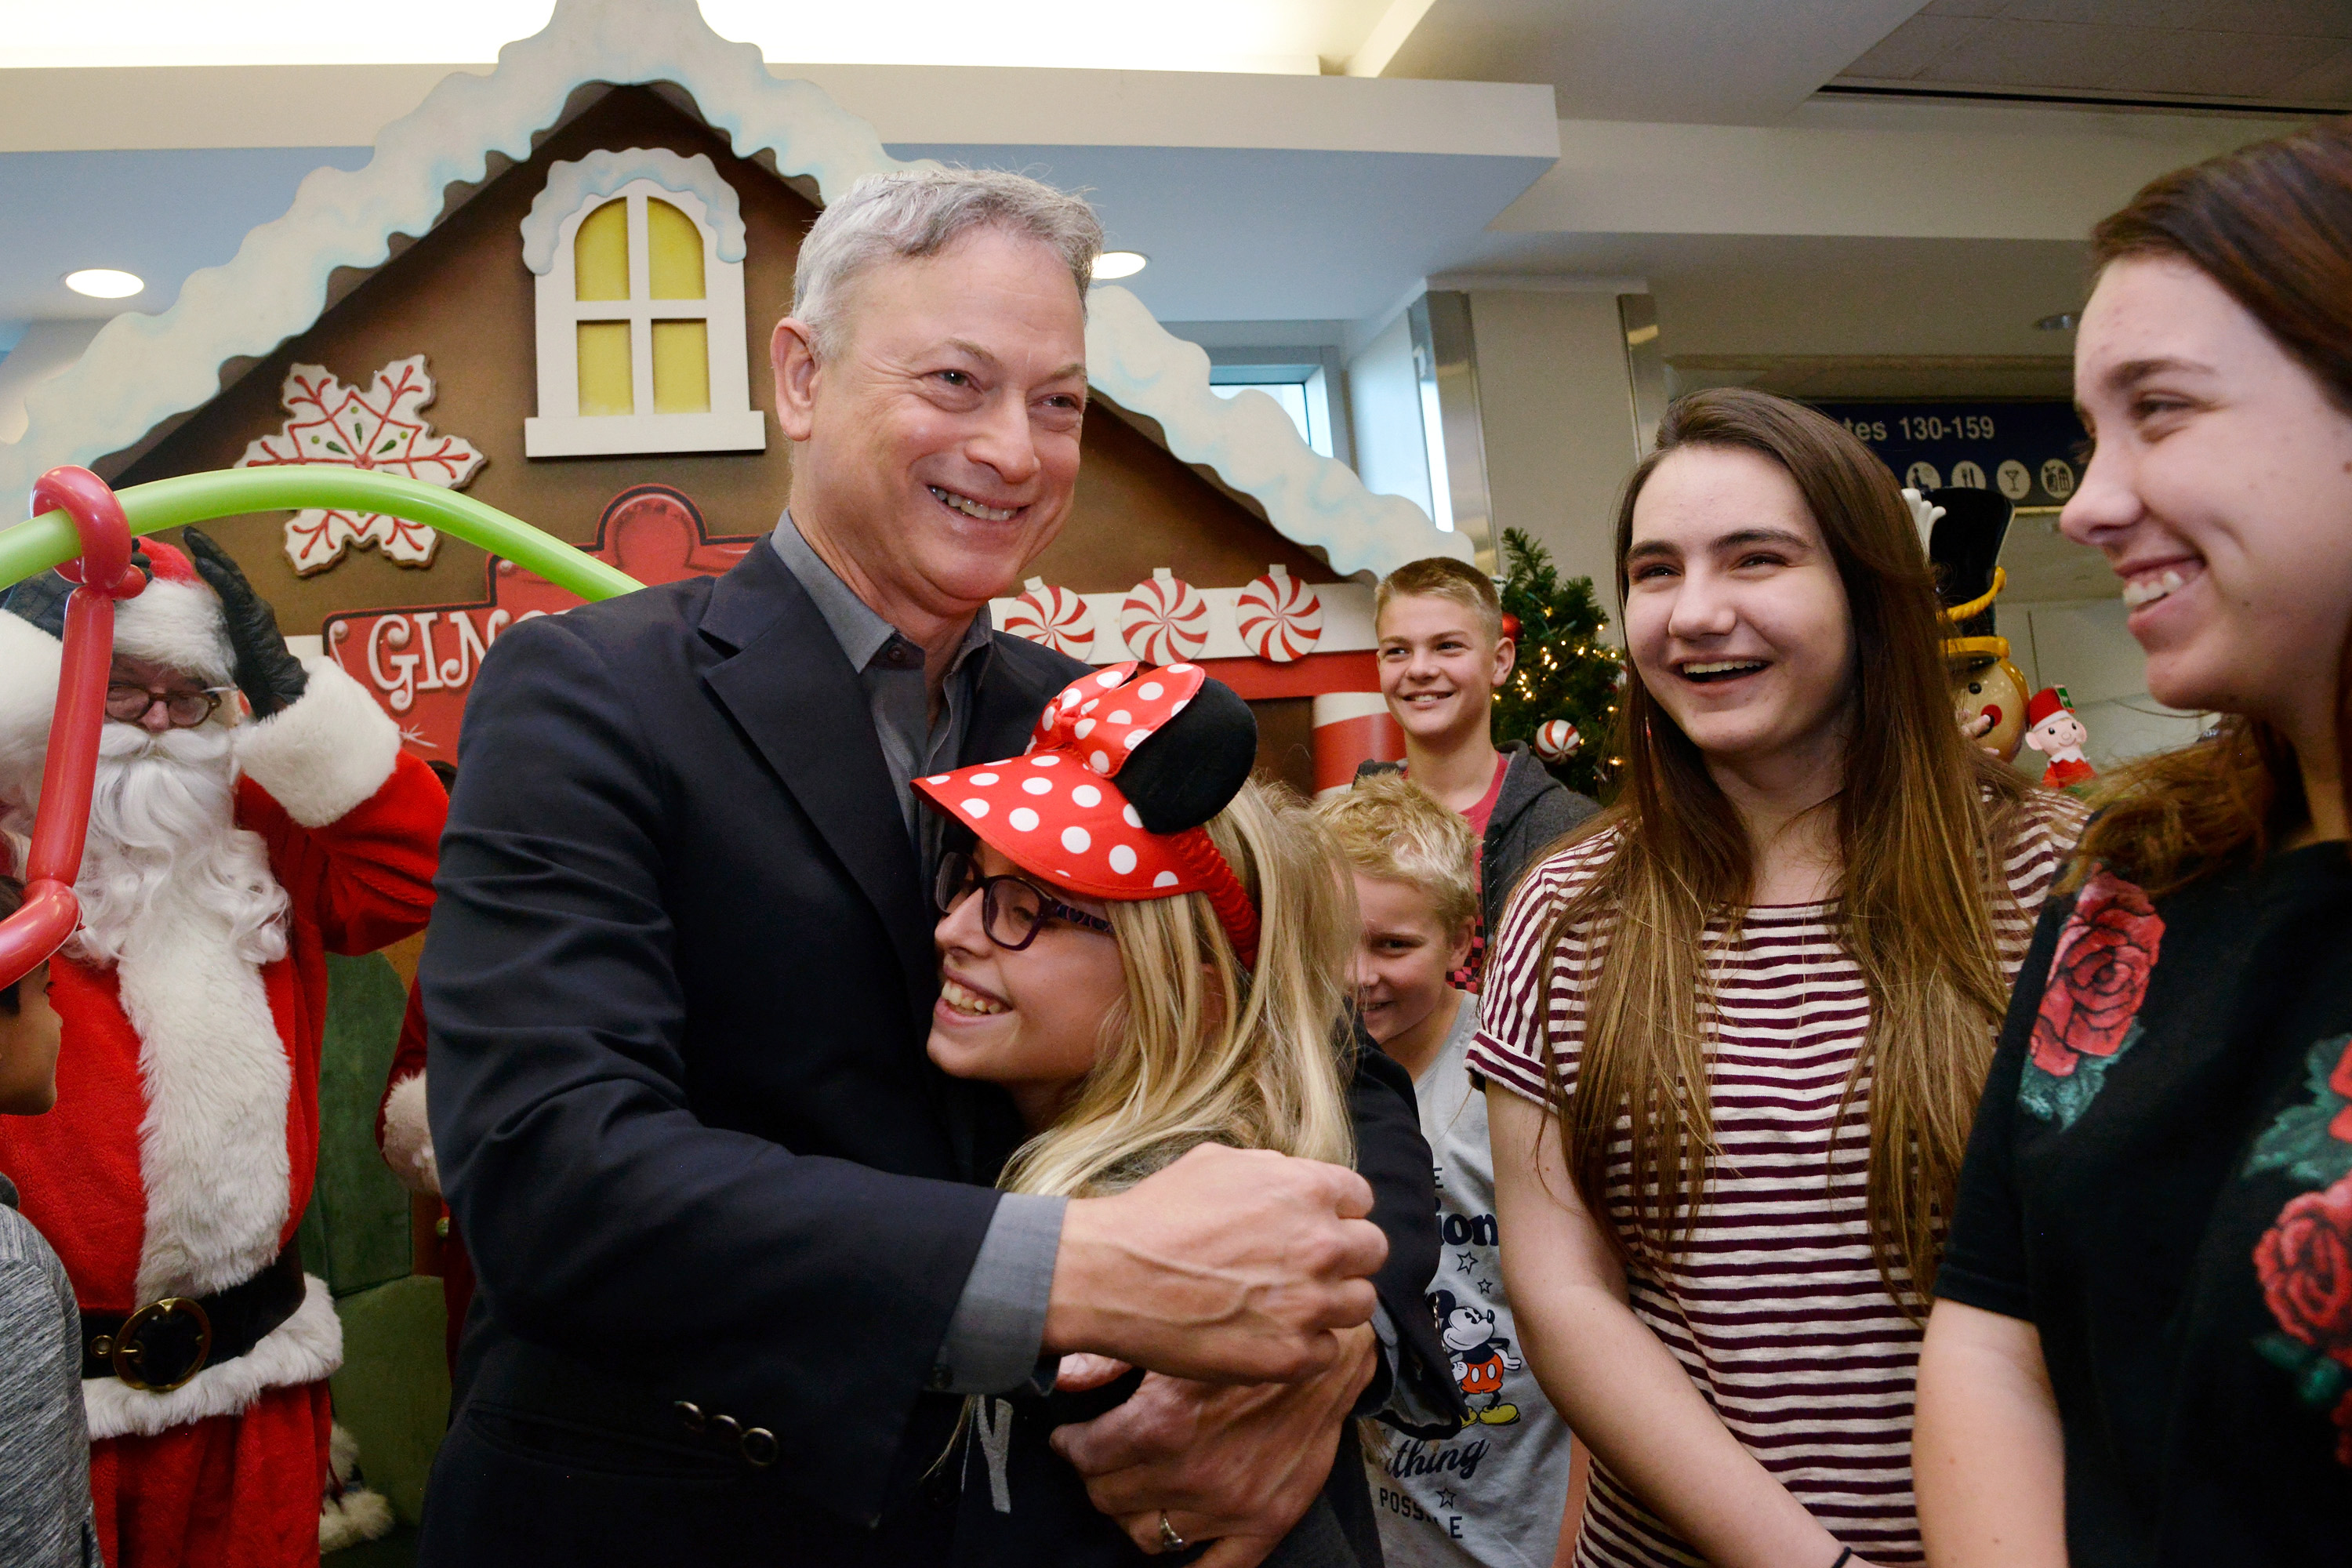 Gary Sinise meets with Gold Star families at the Gary Sinise Foundation's Snowball Express Send-Off Celebration at LAX Airport in Los Angeles, California, on December 8, 2018. | Source: Getty Images